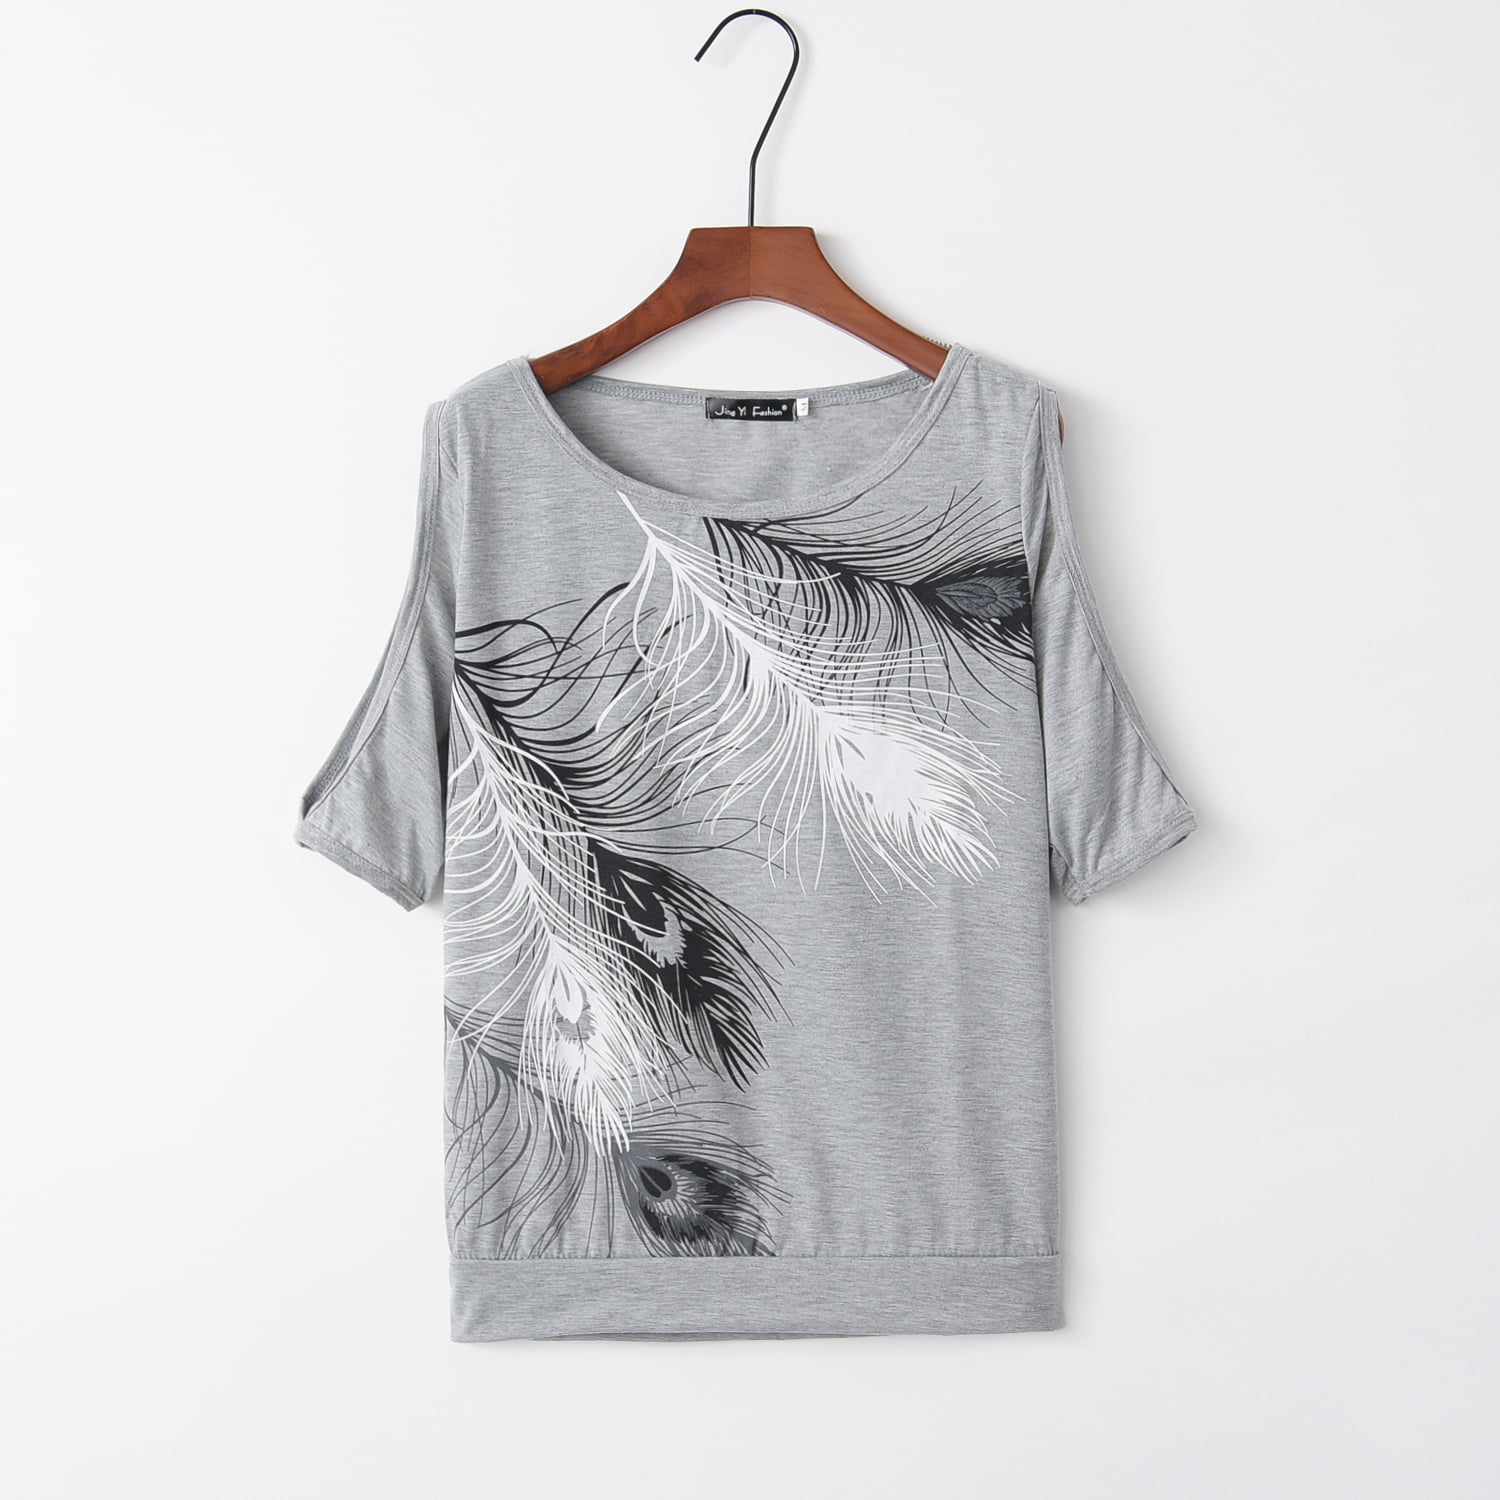 2018 European And American New Feather Print Off-The-Shoulder L Short Sleeve T-Shirt -